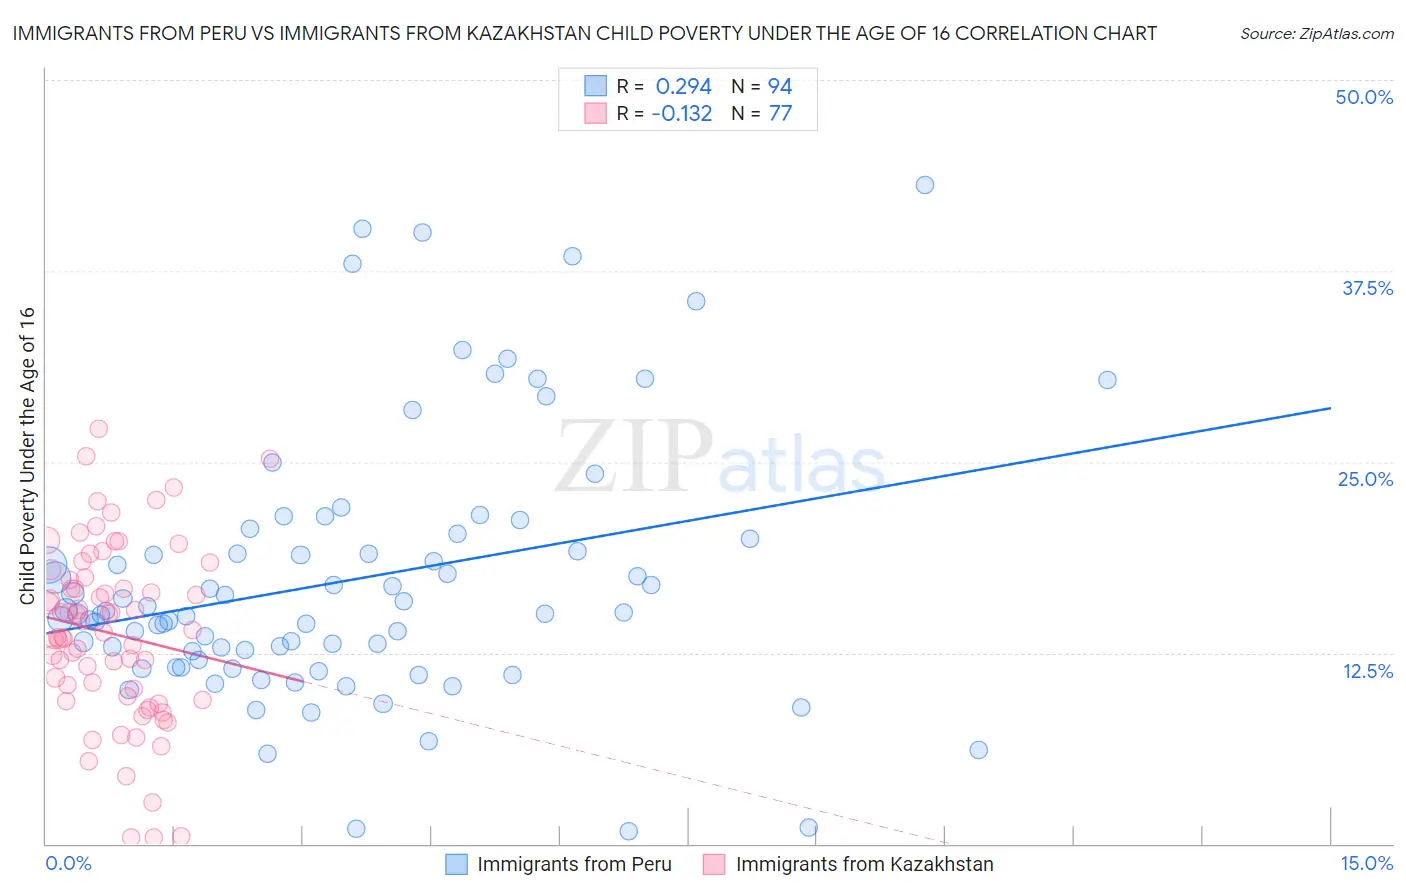 Immigrants from Peru vs Immigrants from Kazakhstan Child Poverty Under the Age of 16